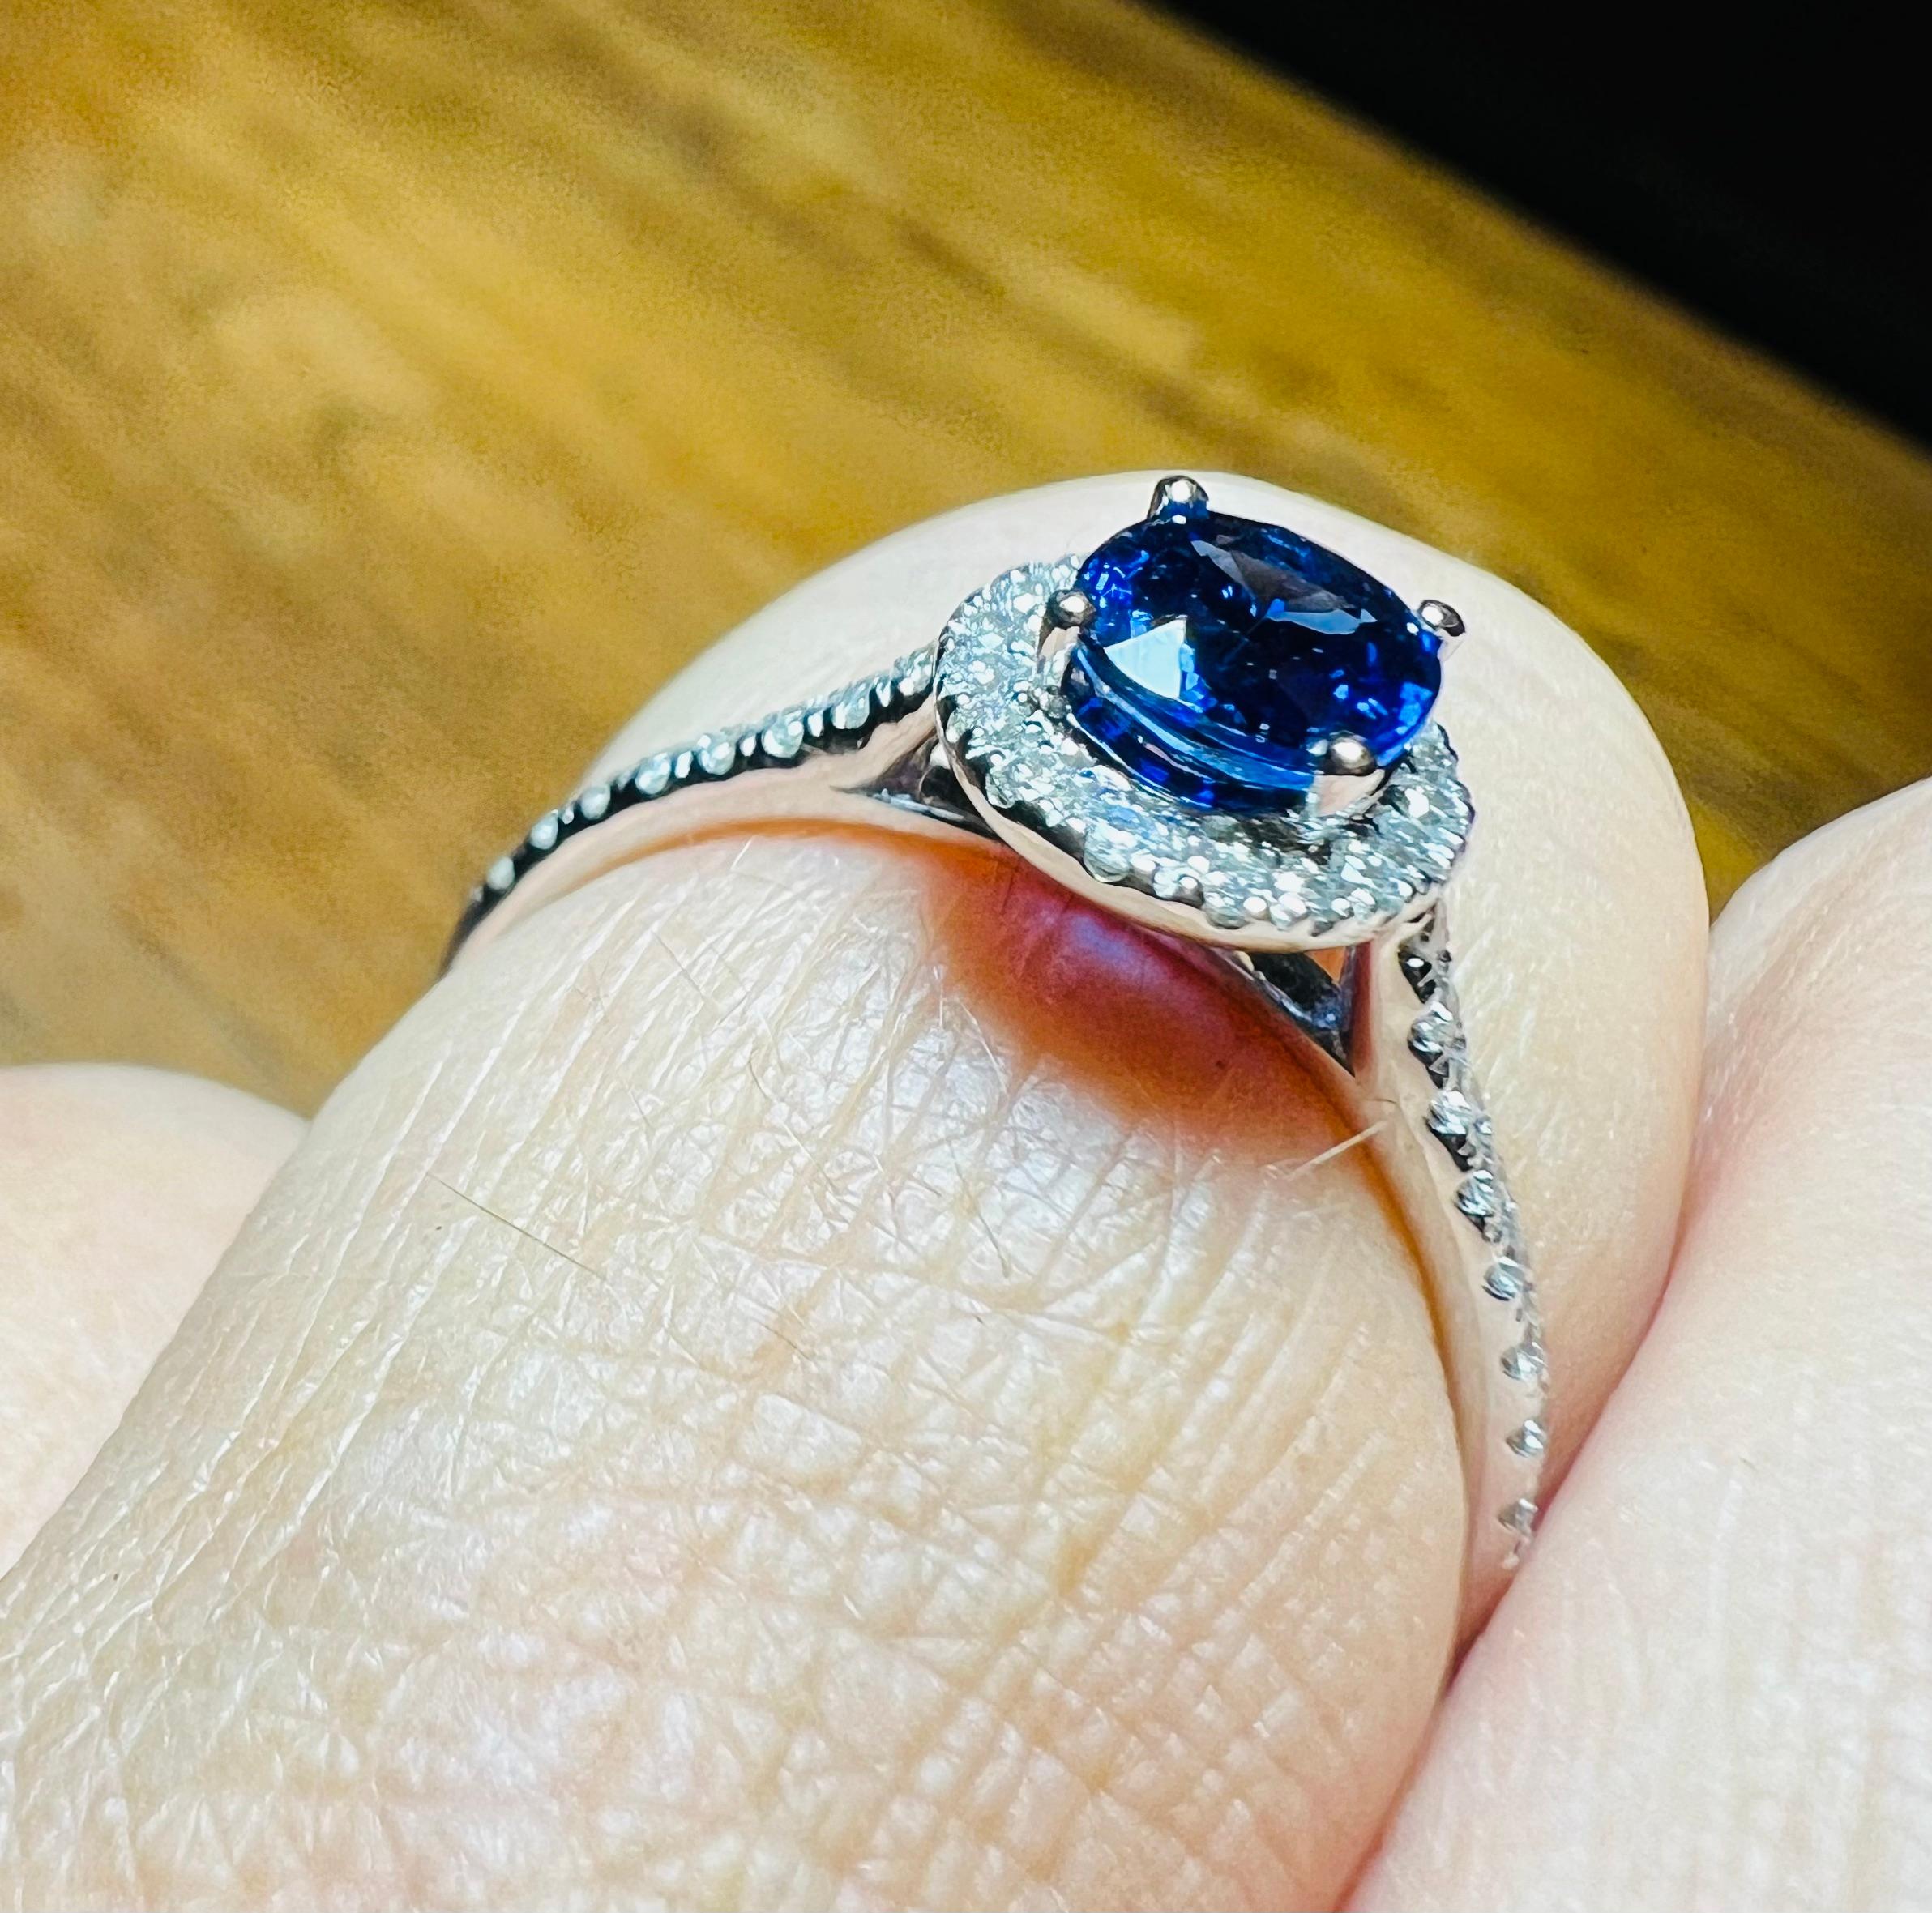 Oval Cut Ring Set With A Sapphire Surrounded By Diamonds, 18 Carat Gold